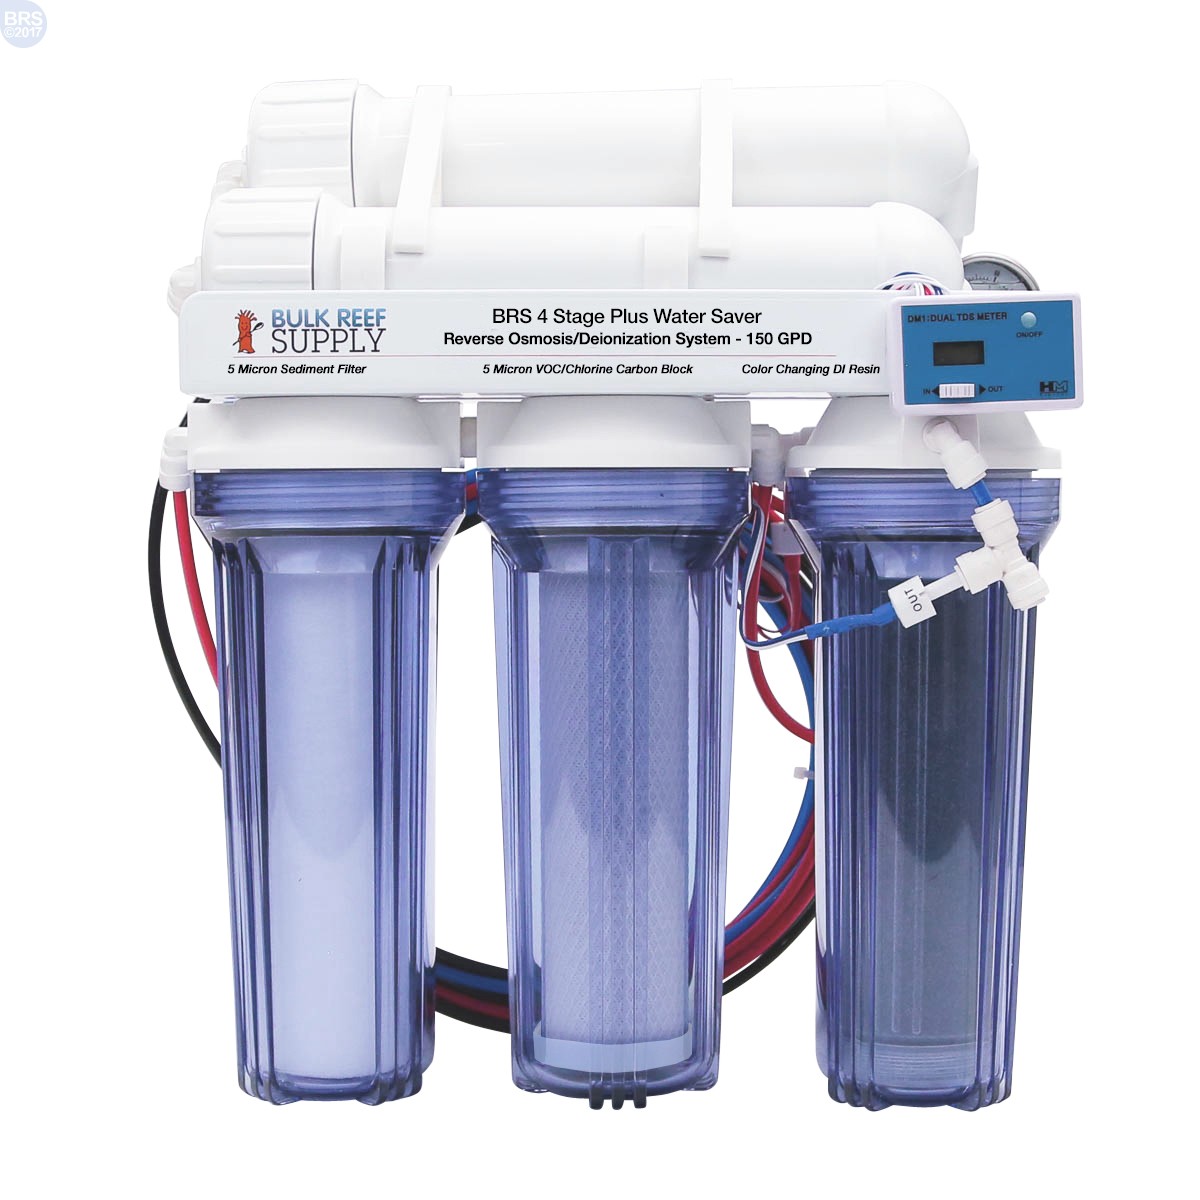 4 Stage 150GPD Plus Water Saver RO/DI System Bulk Reef Supply Reverse Osmosis Systems